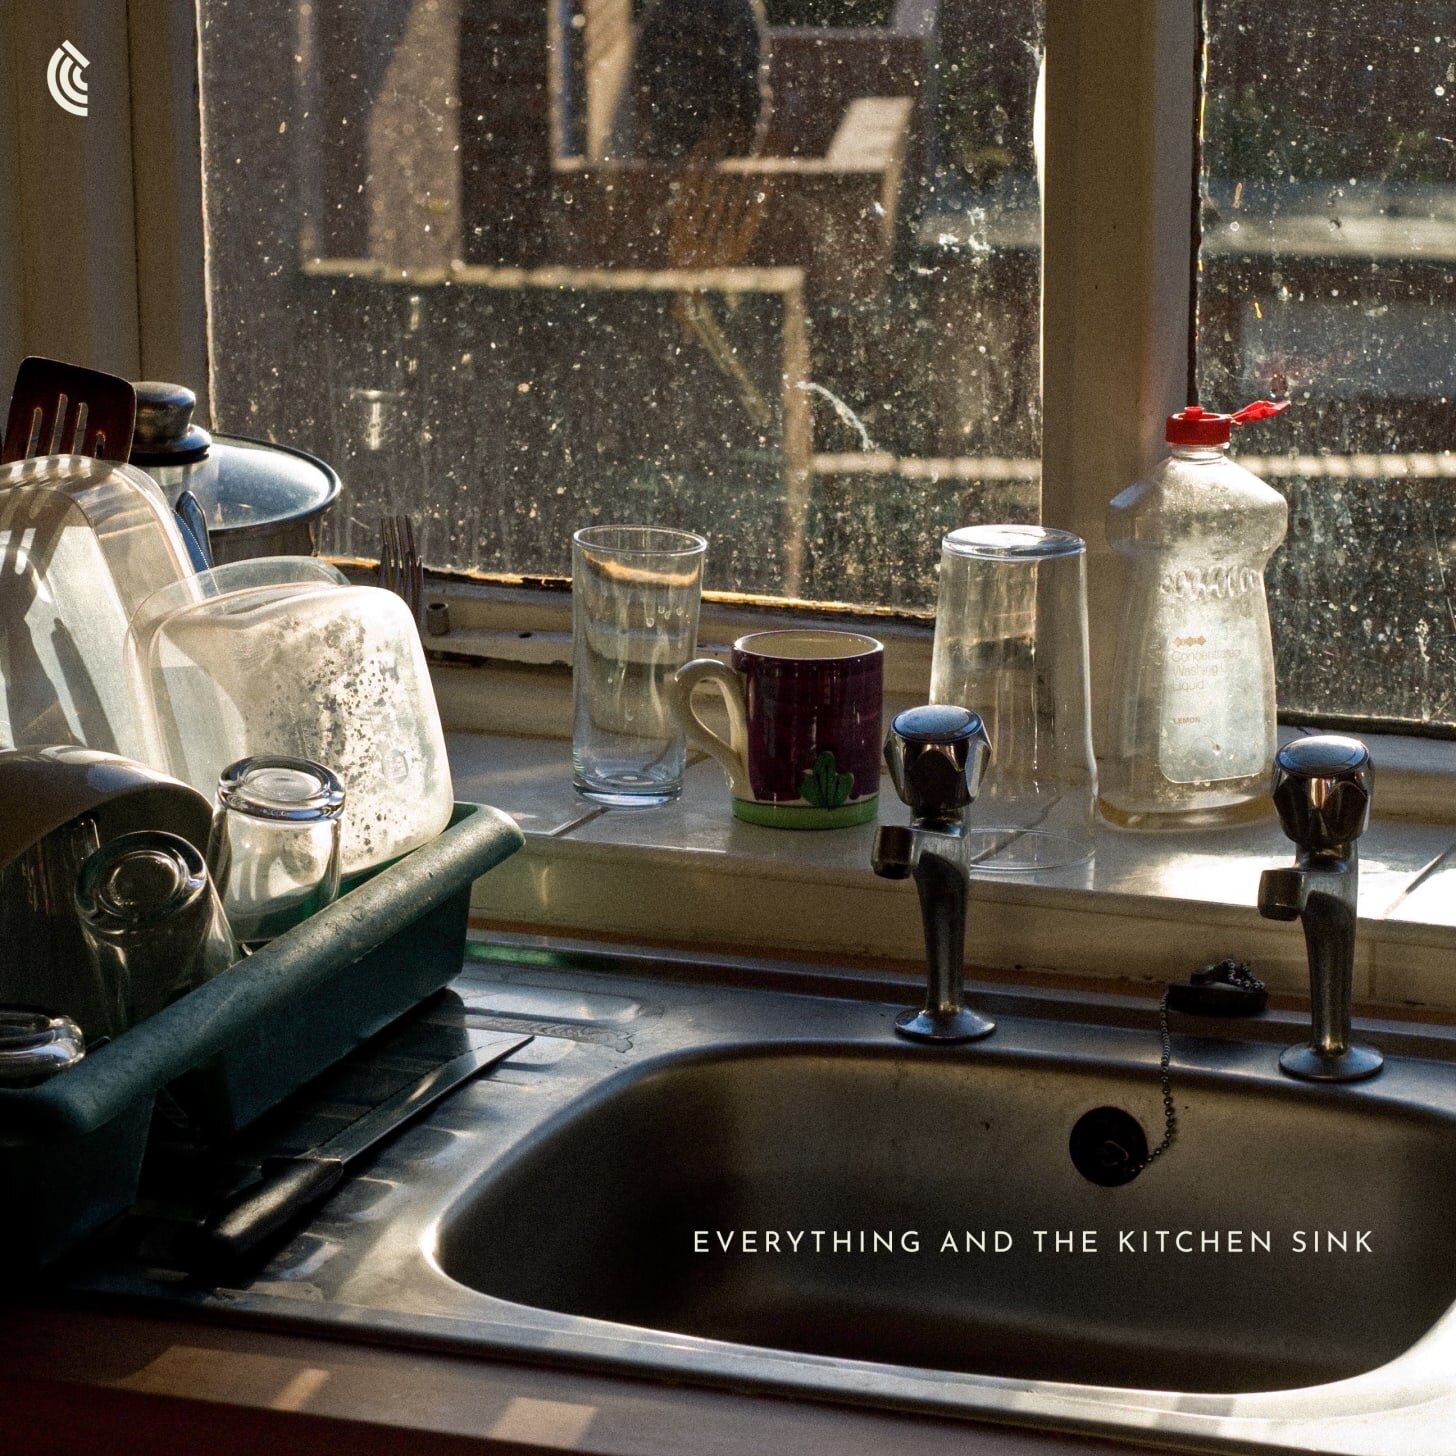 Everything And The Kitchen Sink by Little Fish